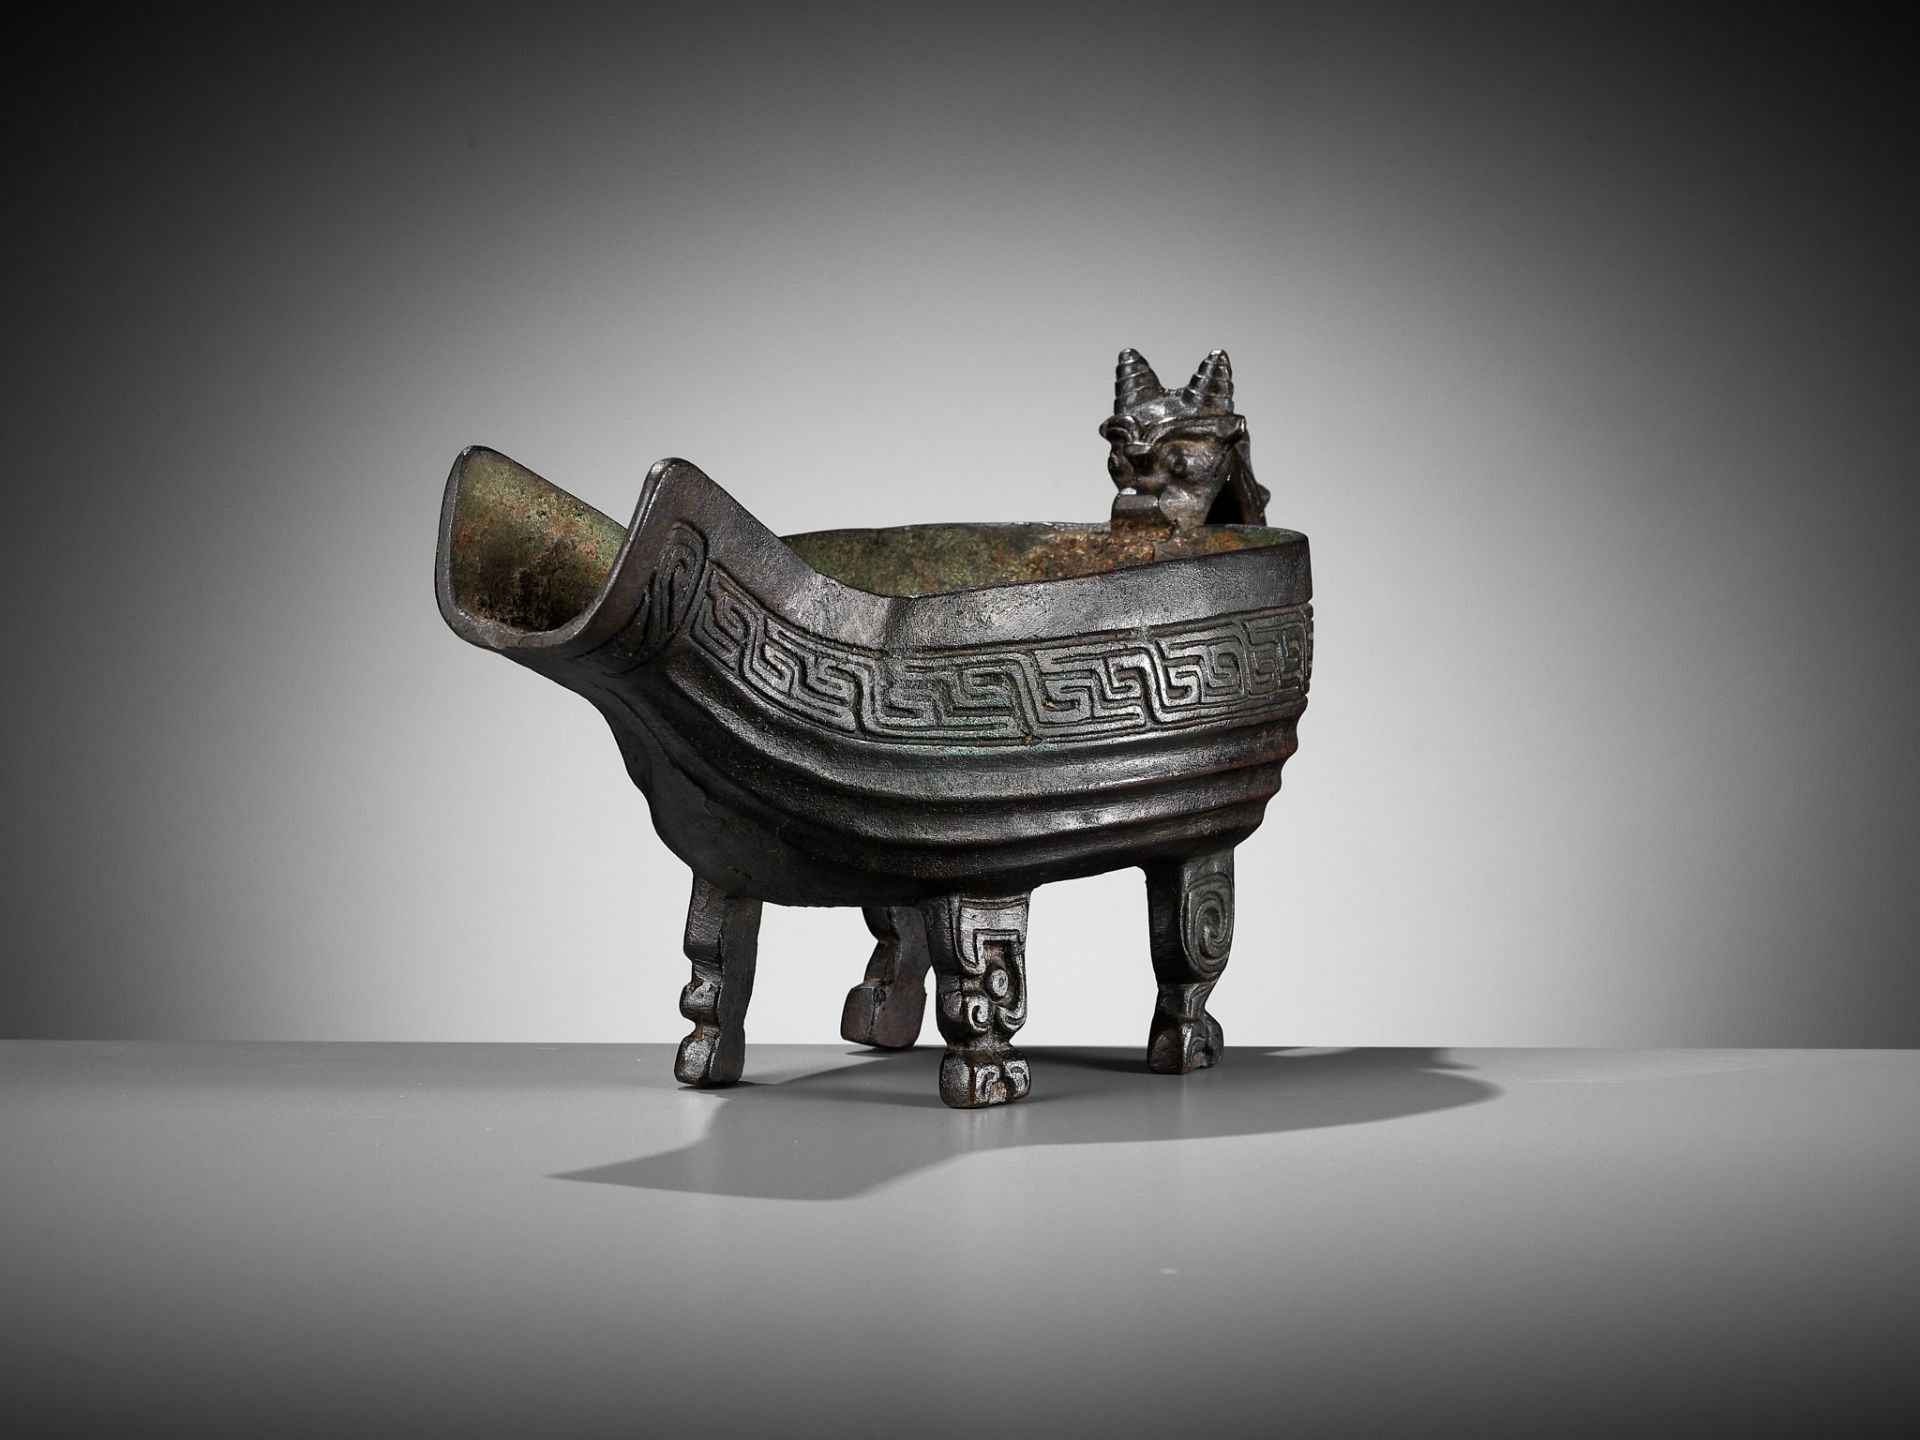 A BRONZE POURING VESSEL, YI, LATE SONG - EARLY MING DYNASTY - Image 9 of 19